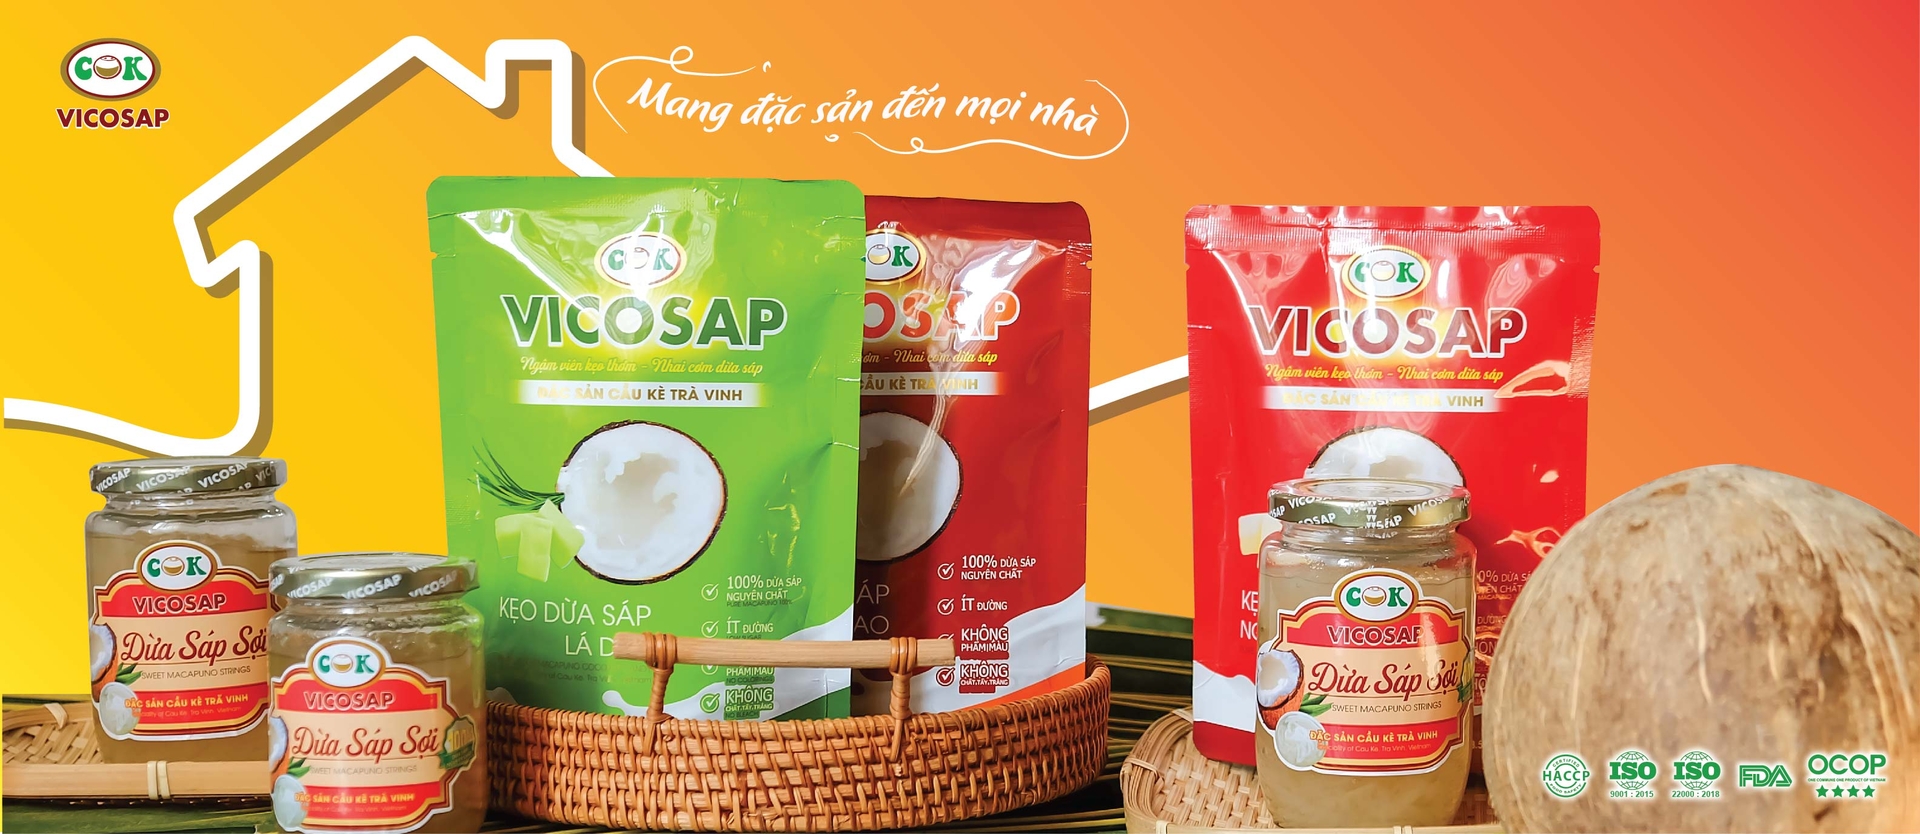 A variety of Vicosap products deeply processed from macapuno, including macapuno strings, are awarded OCOP certification.